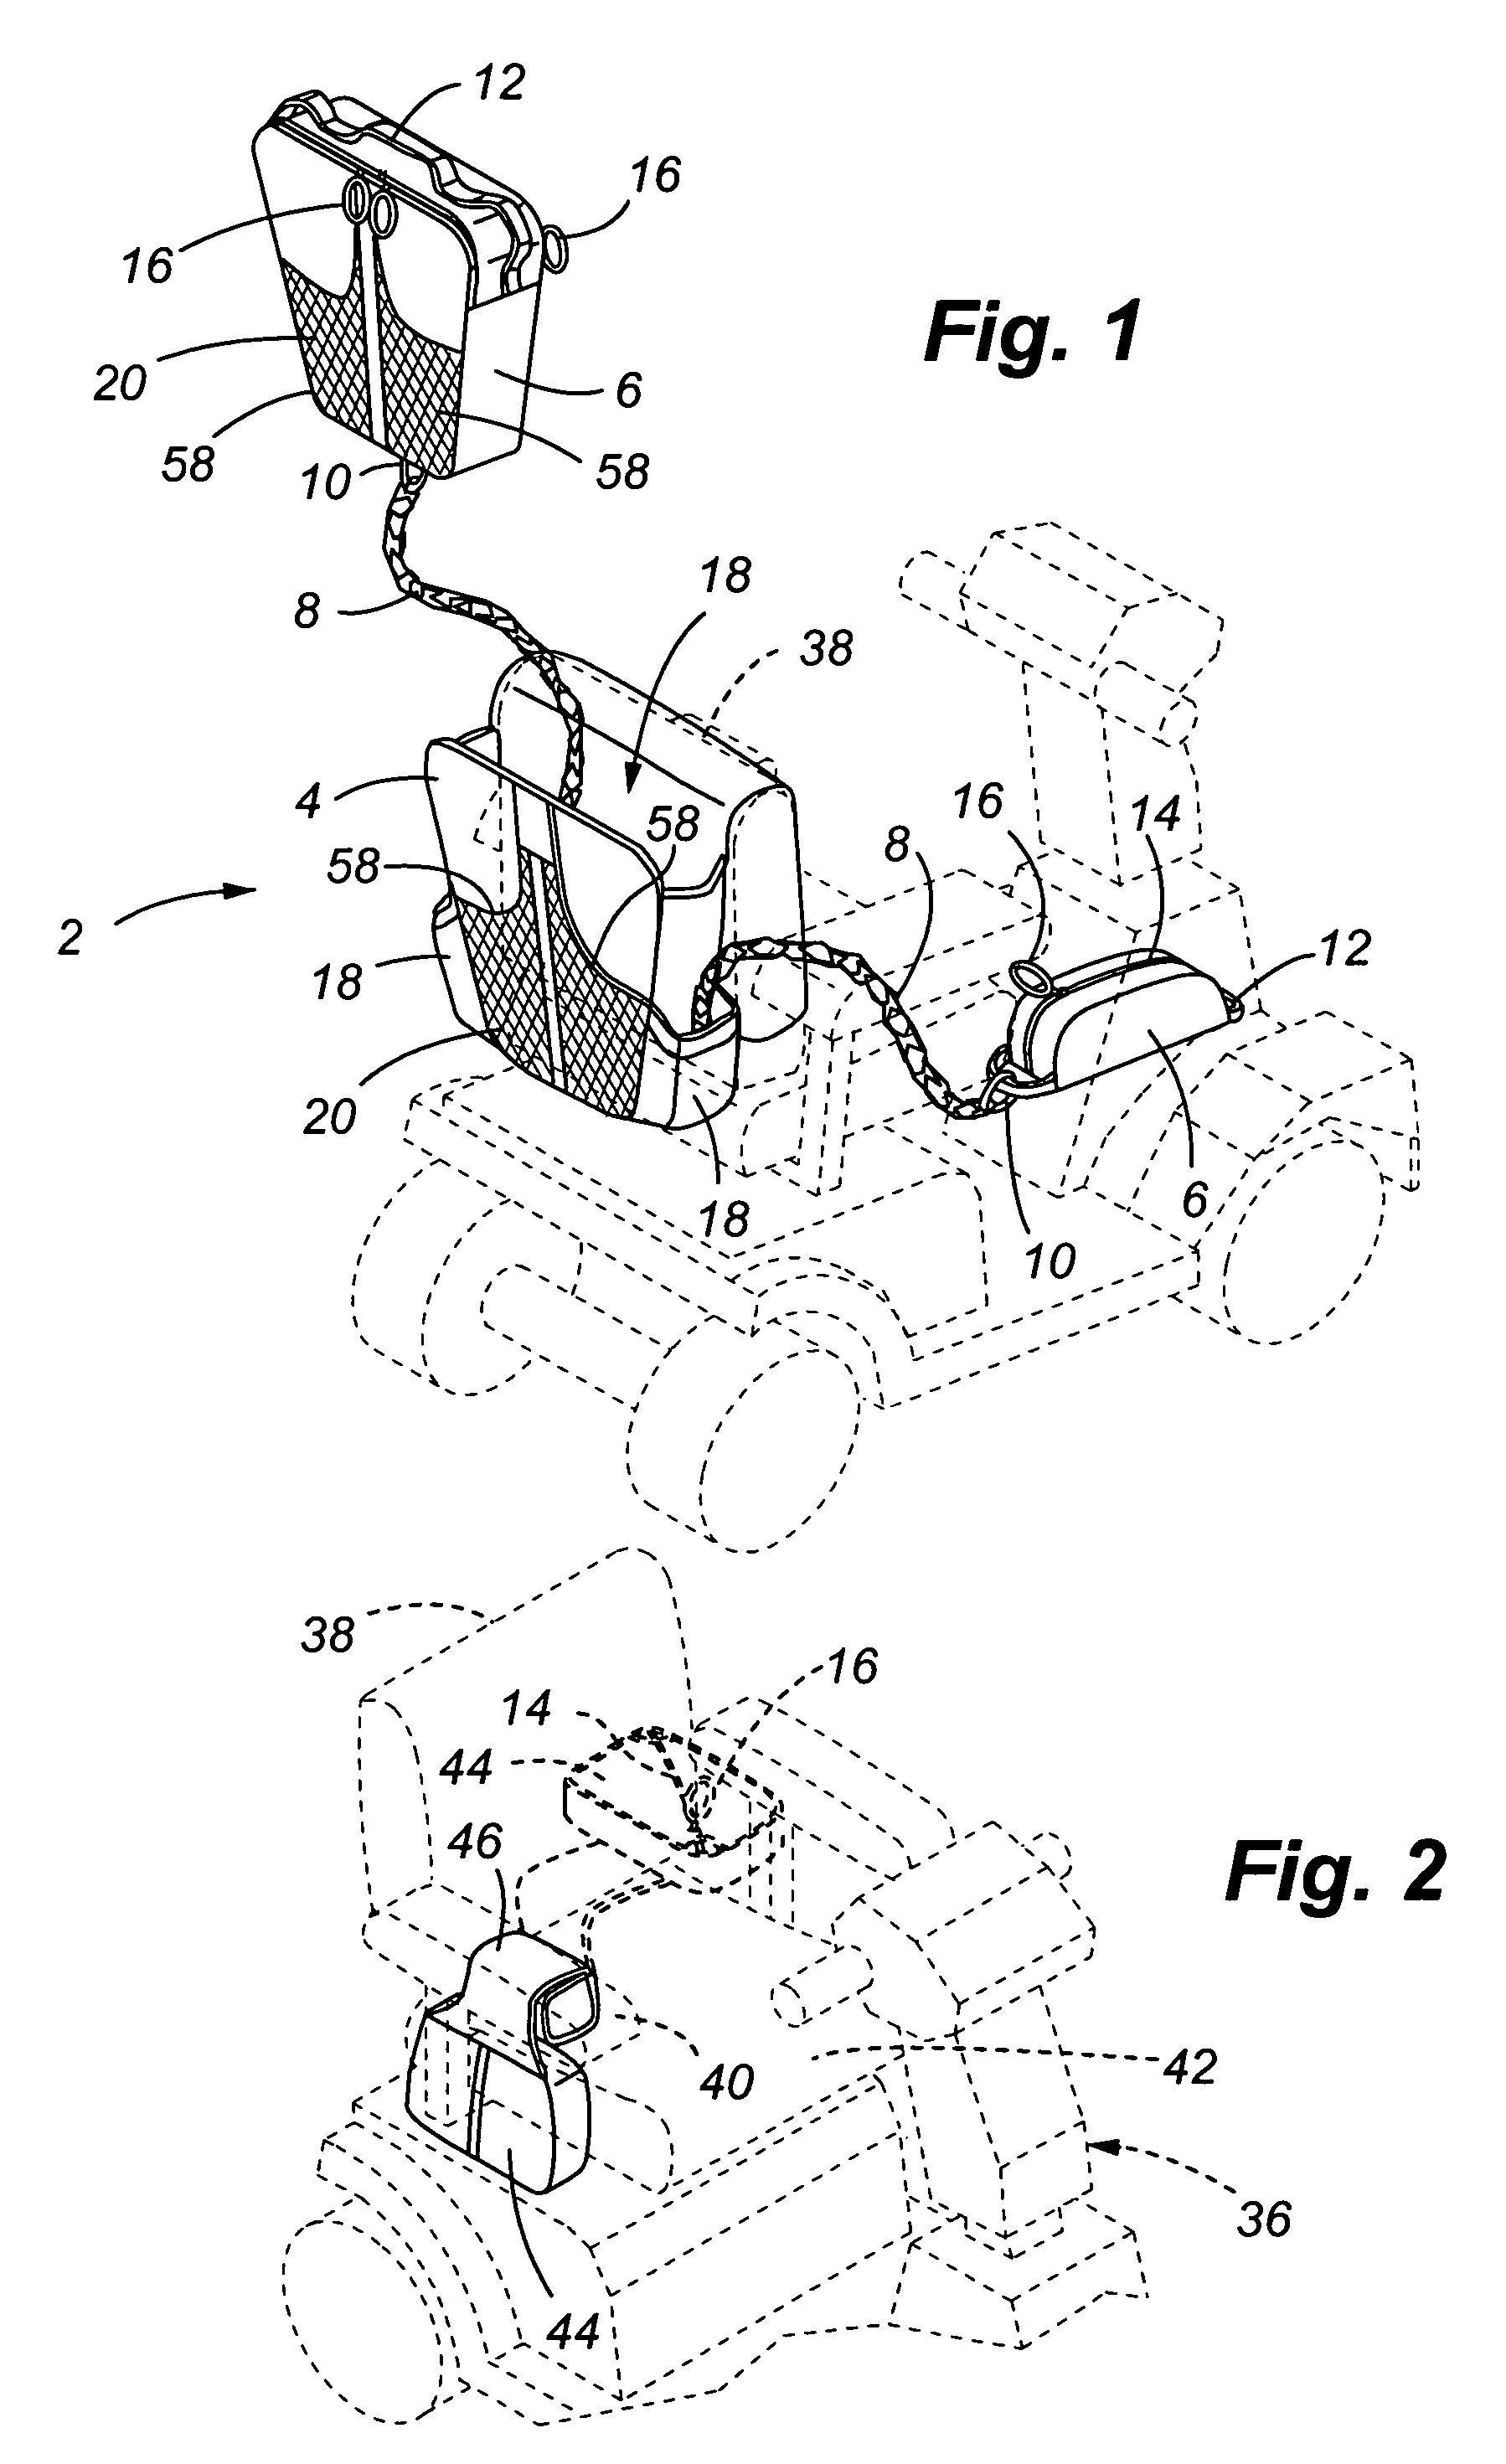 Personal storage apparatus for wheelchairs and other mobility assistance devices